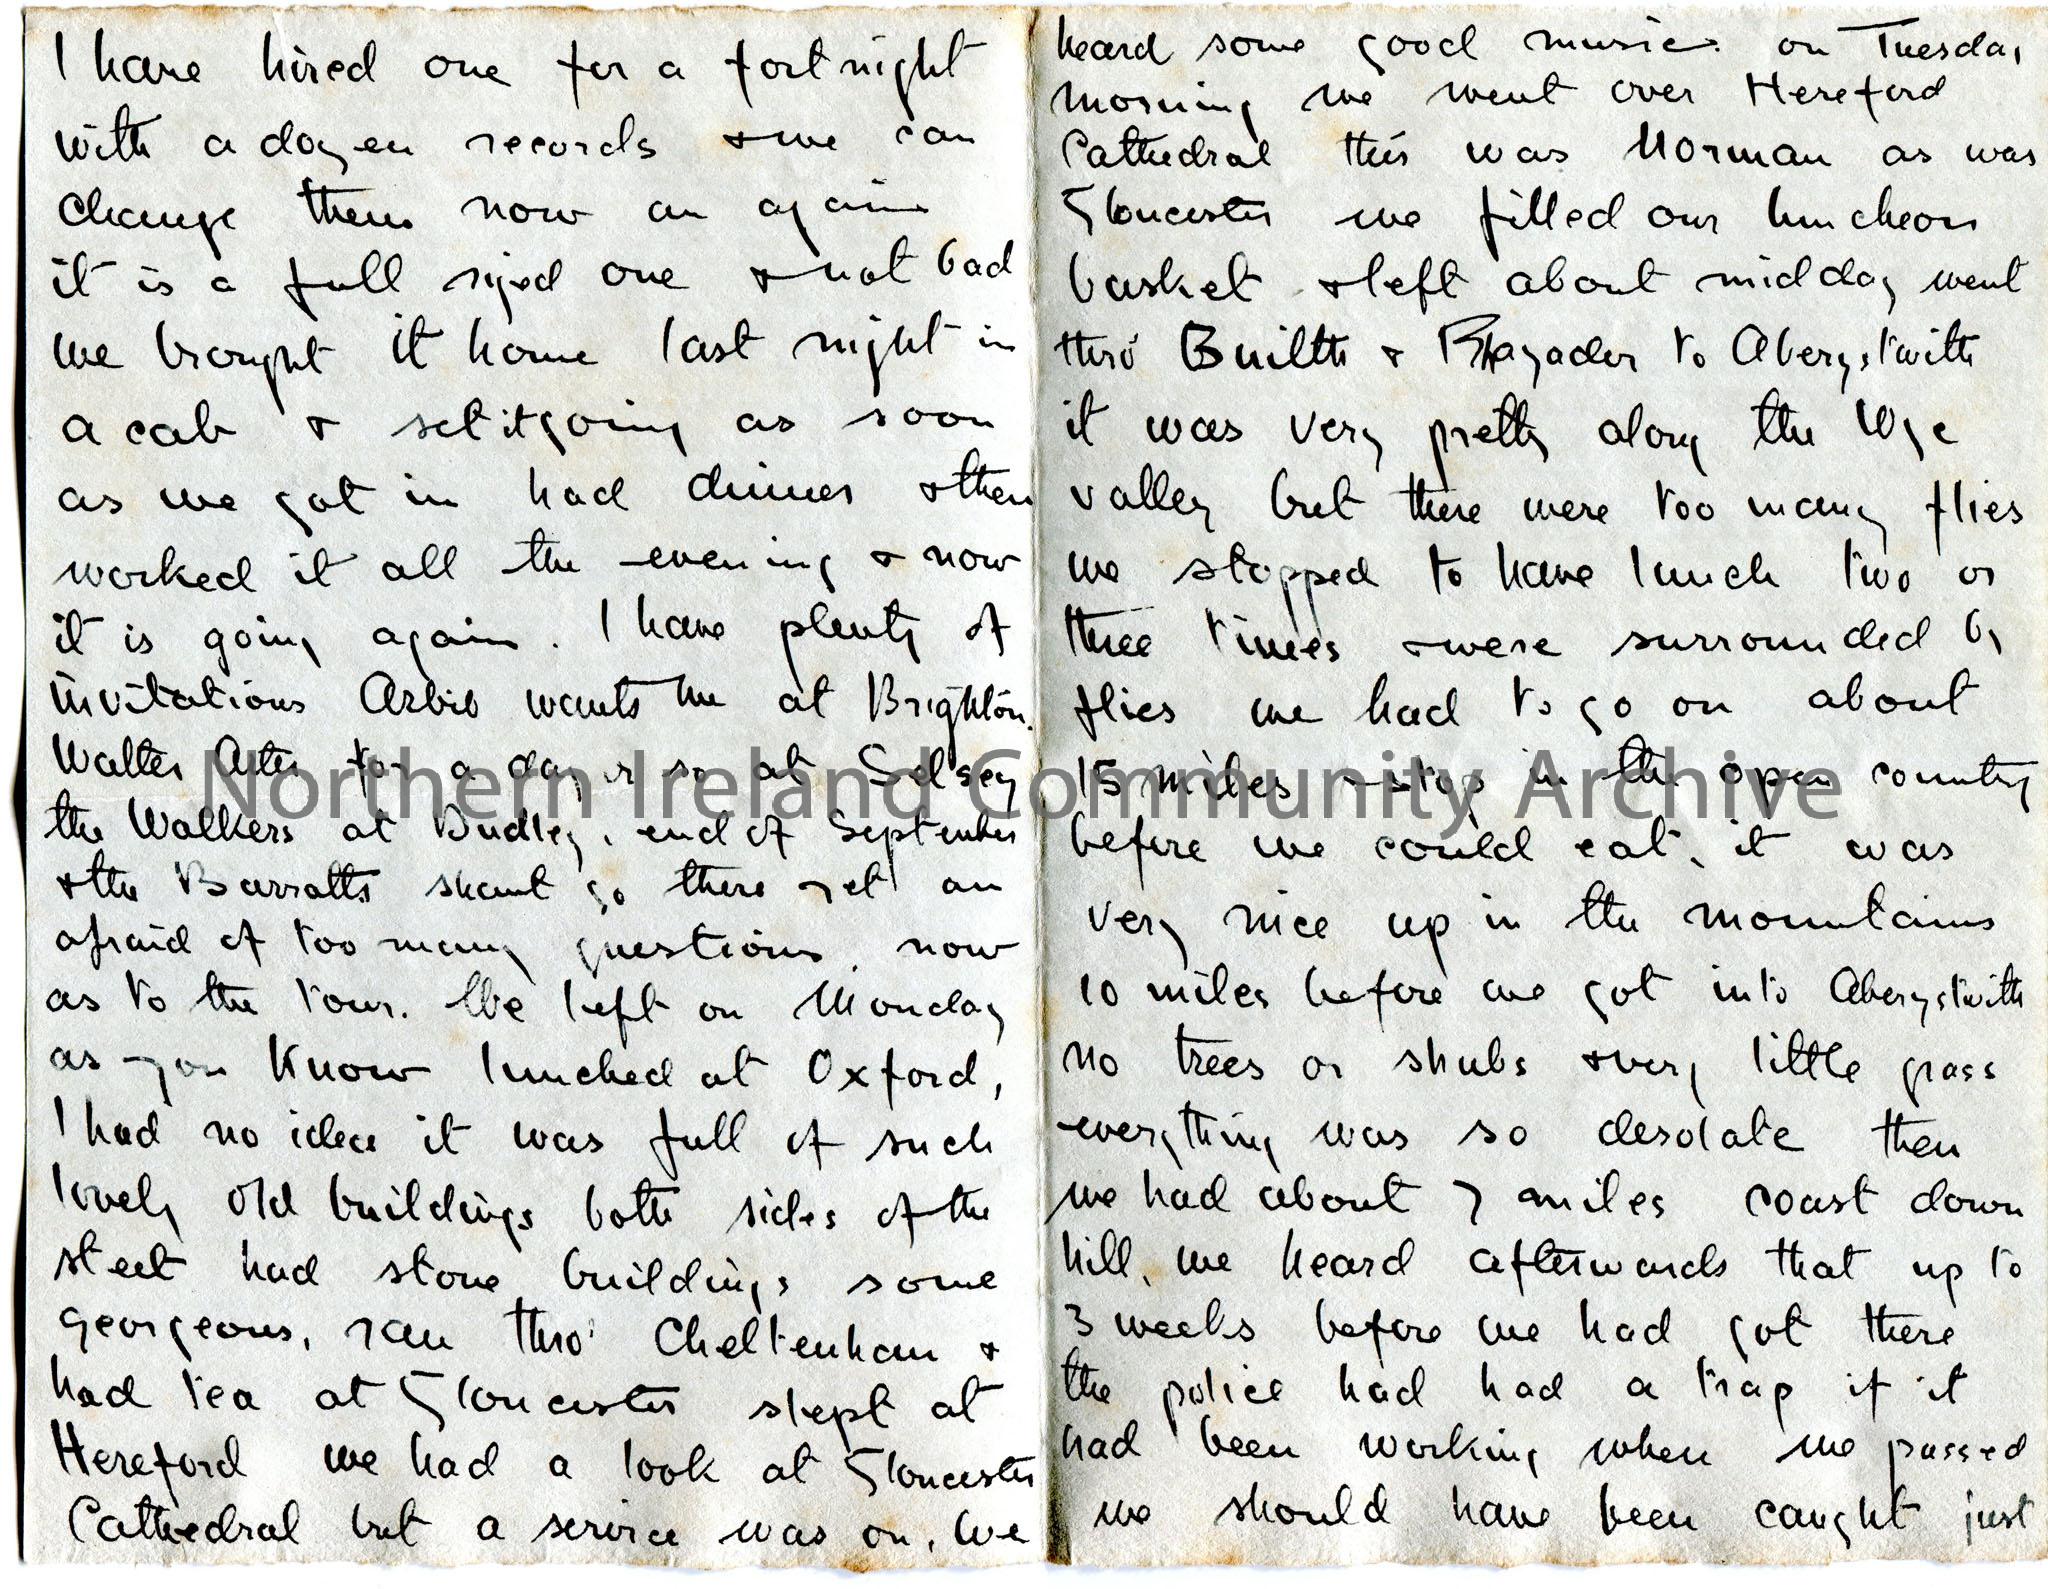 Page 1 of 2 of handwritten letter from A. Marshall Arter (Dorothy’s brother Bertie) to their mother. Writes of being in a tour in a car having covered… – img166b